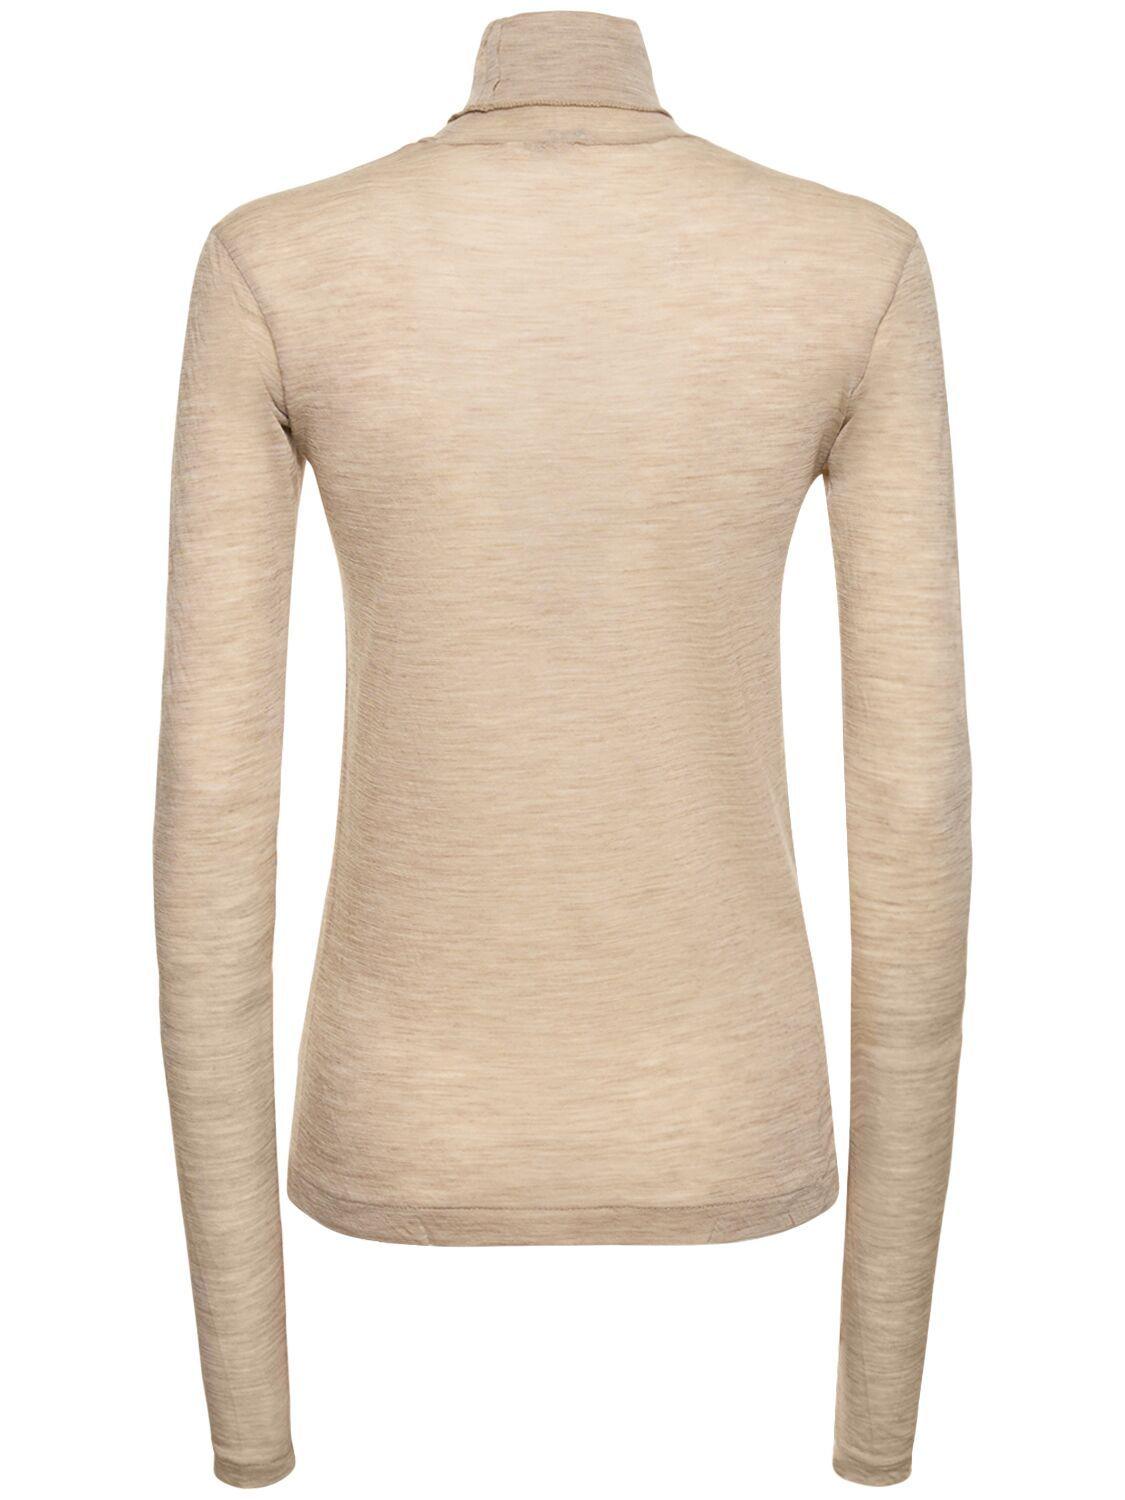 AURALEE Super Soft Sheer Wool Jersey Top in Natural | Lyst